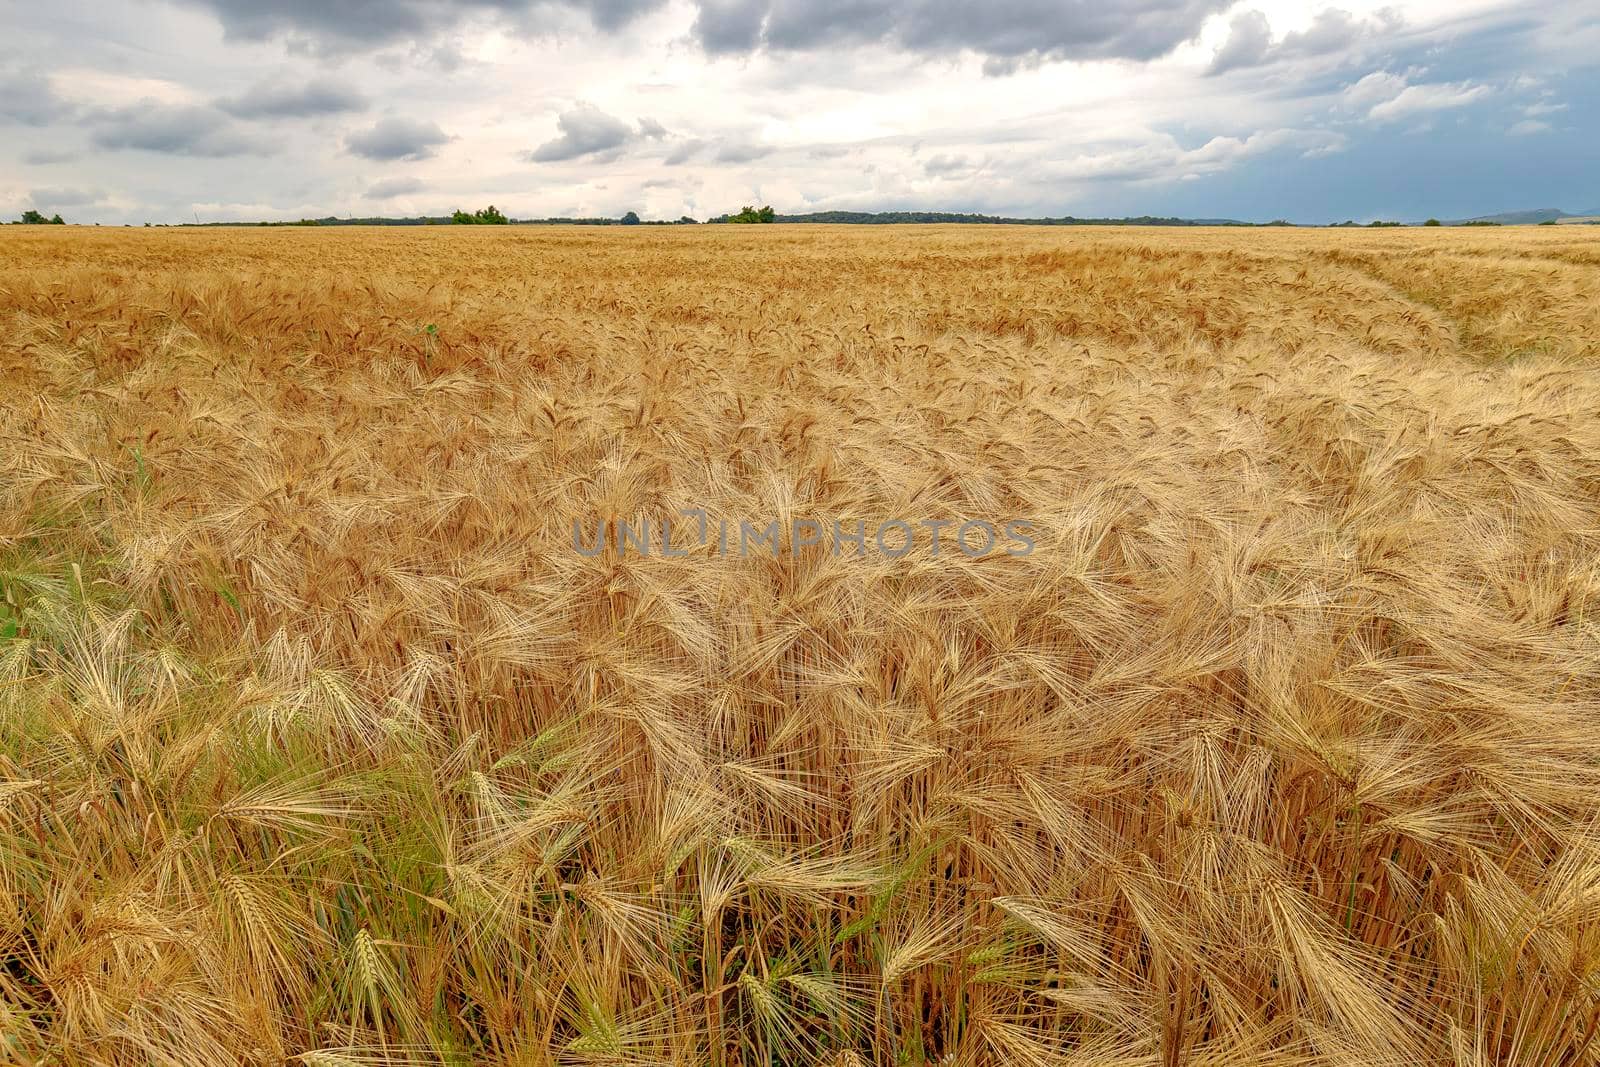 The vast landscape of ripe barley and cloudy sky by EdVal